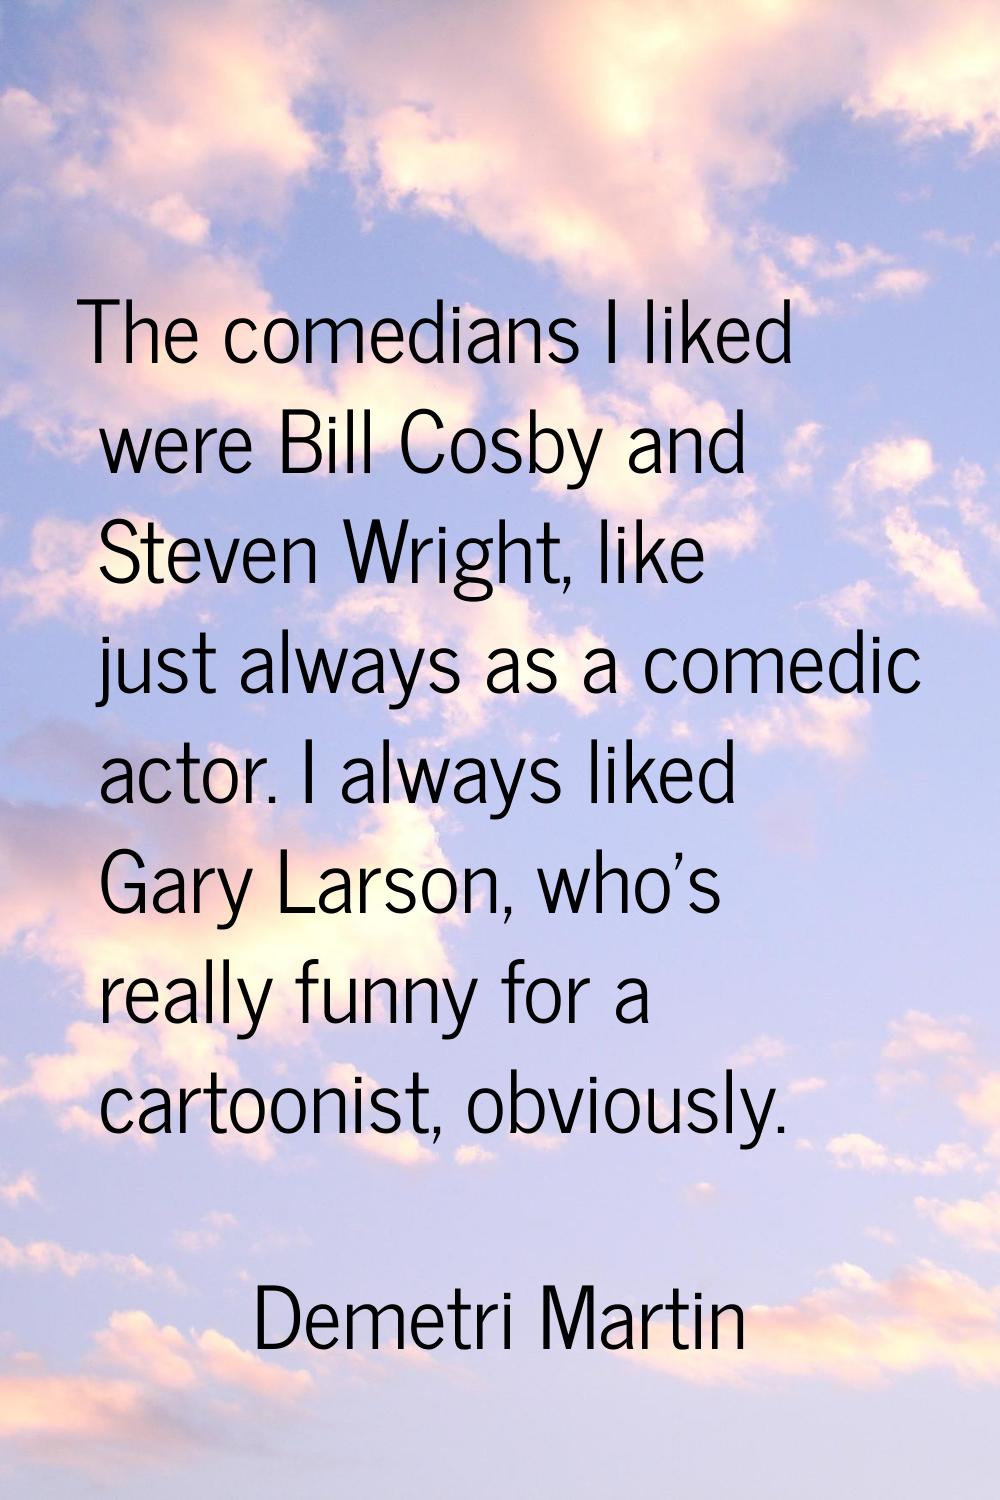 The comedians I liked were Bill Cosby and Steven Wright, like just always as a comedic actor. I alw